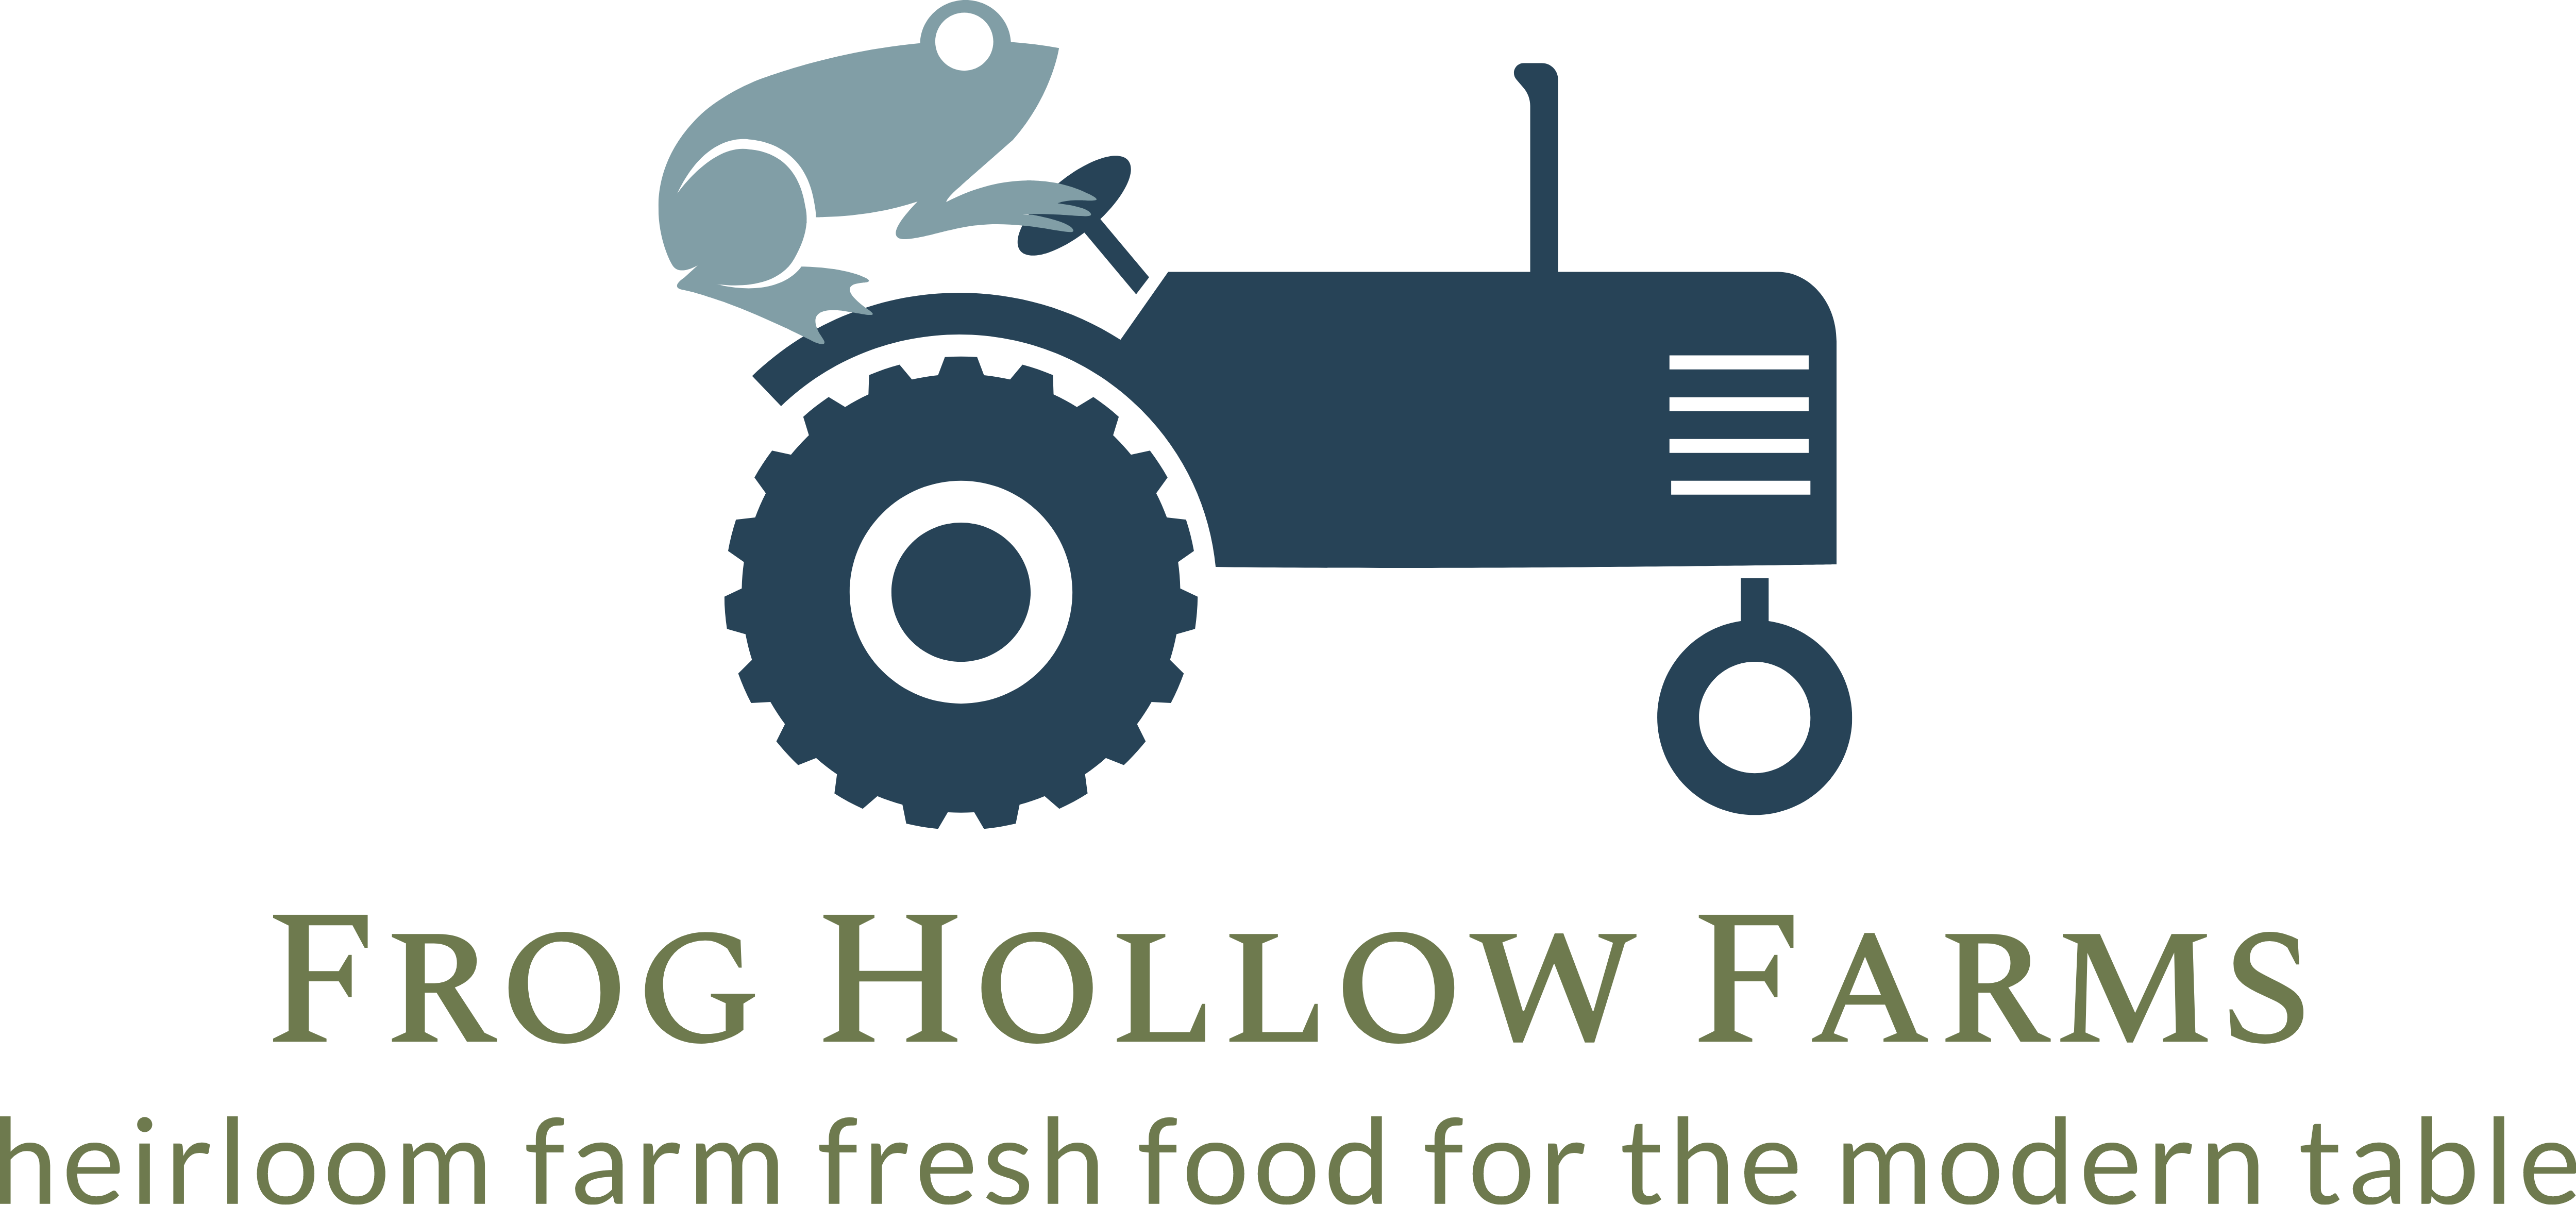 Frog Hollow Farms